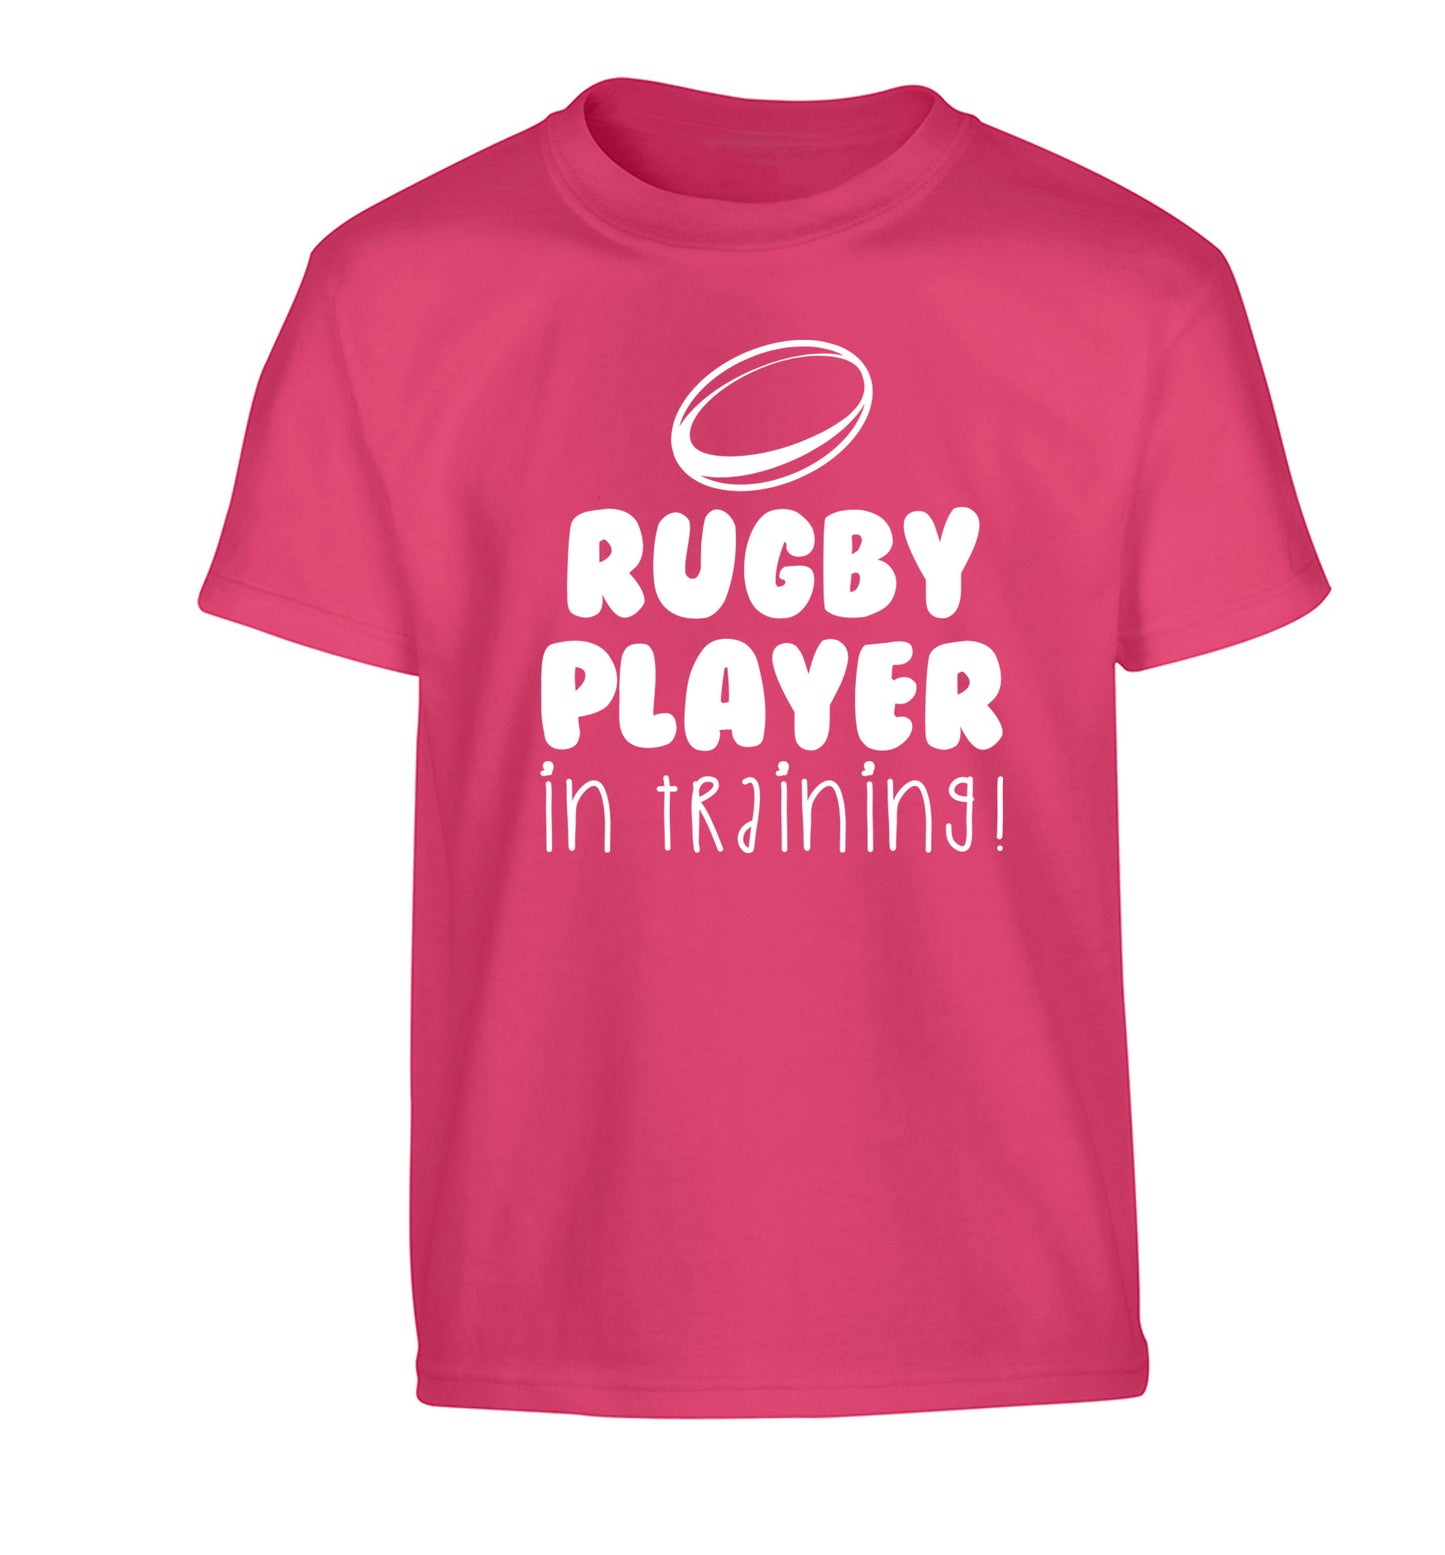 Rugby player in training Children's pink Tshirt 12-14 Years